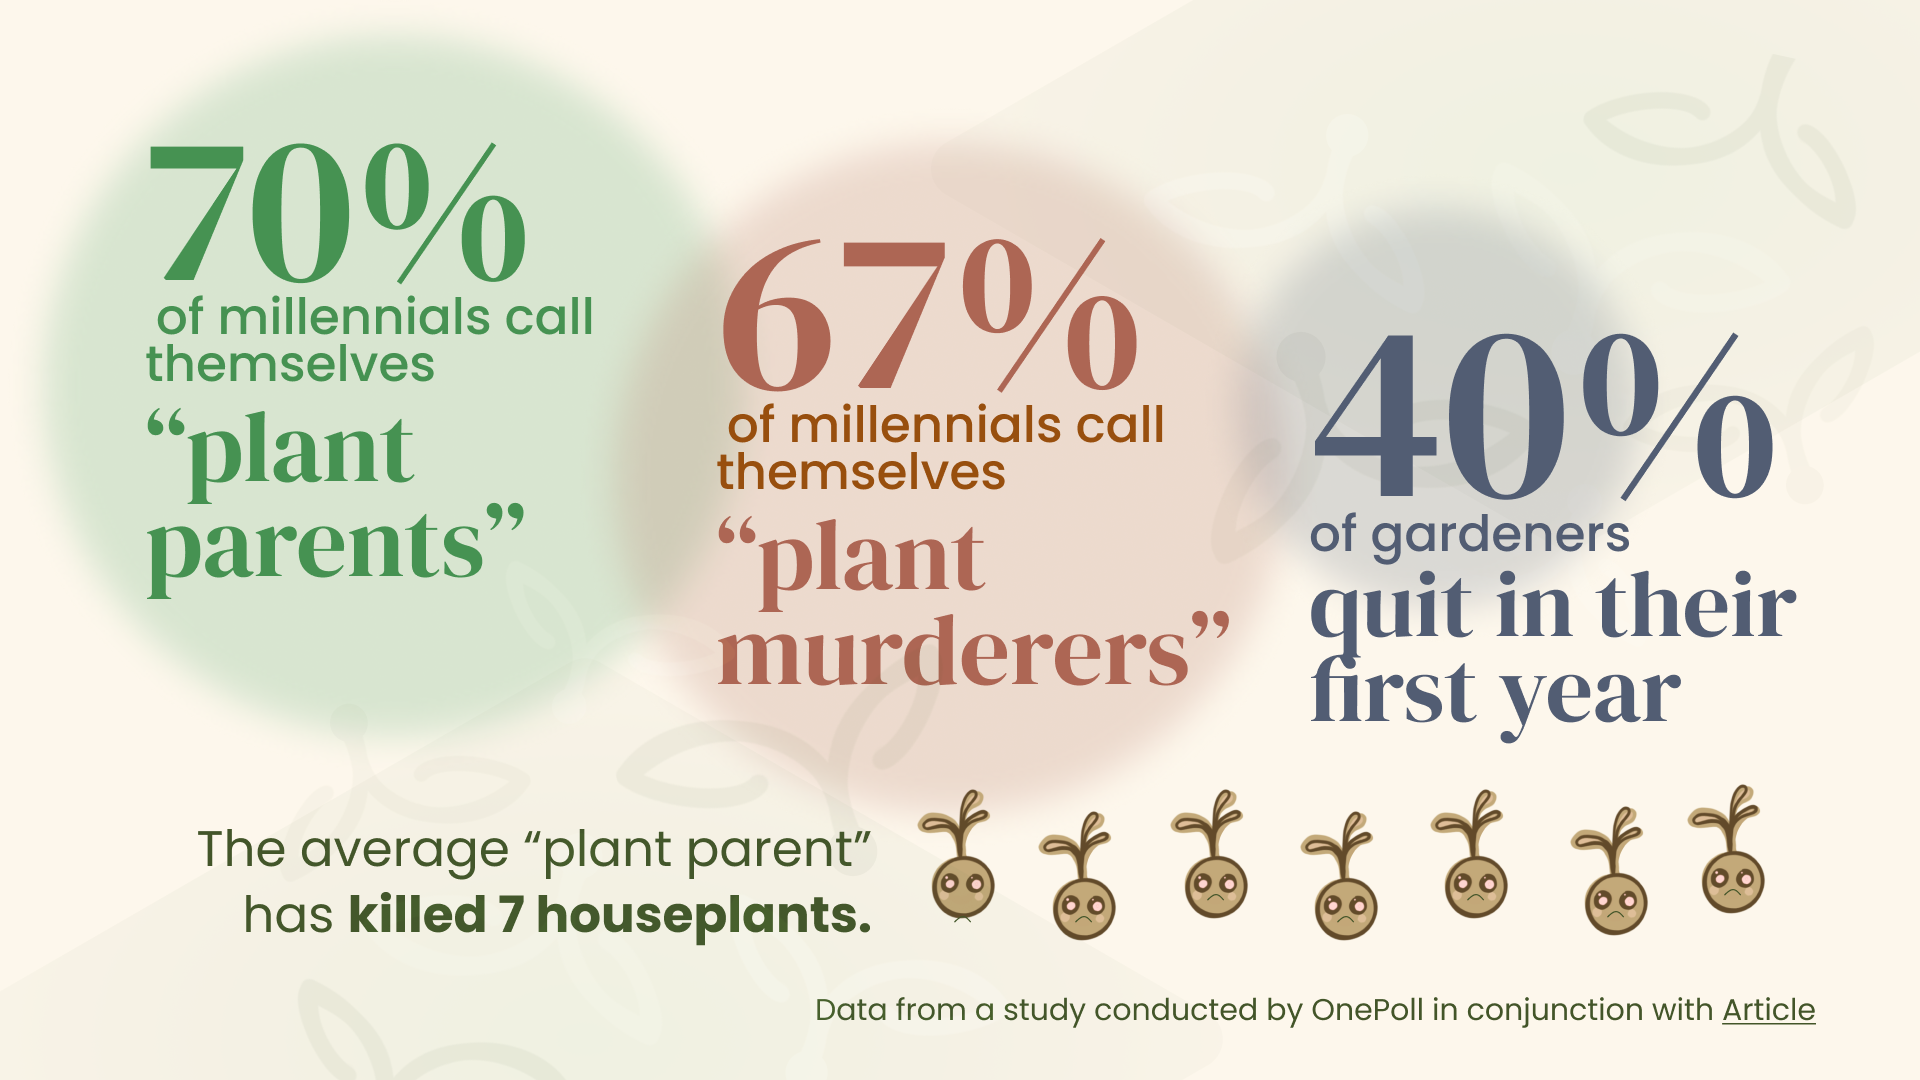 According to a study conducted by OnePoll: 70% of millennials call themselves "plant parents." 67% of millennials call themselves "plant murderers," the average "plant parent" has killd 7 houseplants, and 40% of gardeners quit in their first year. 